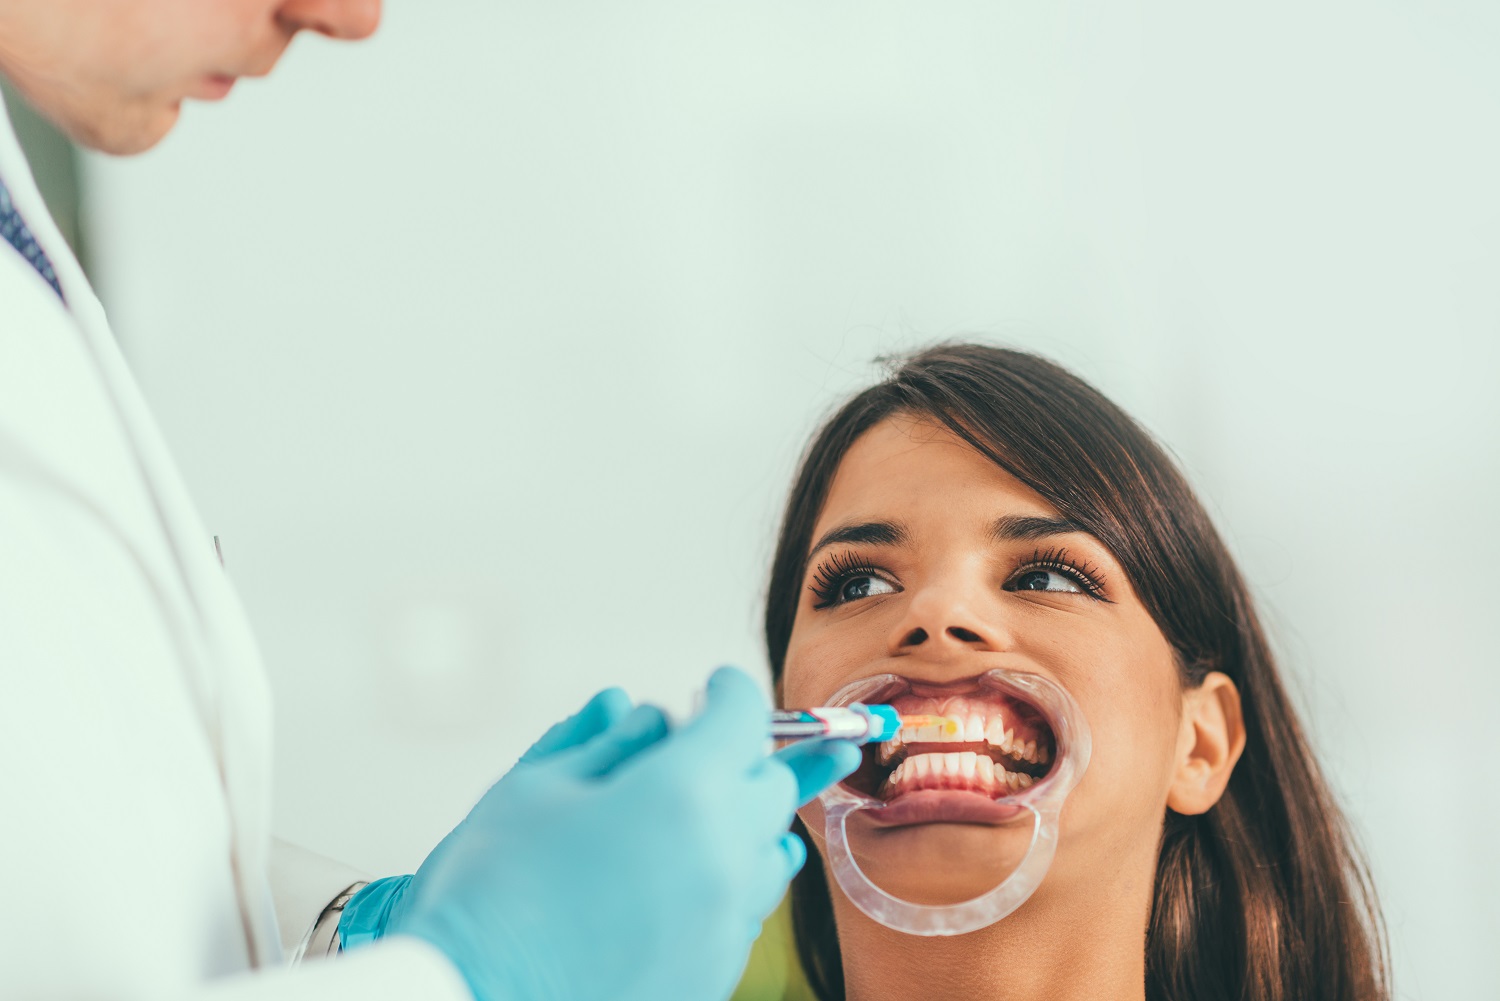 What Is Cosmetic Dentistry? - J.D. 